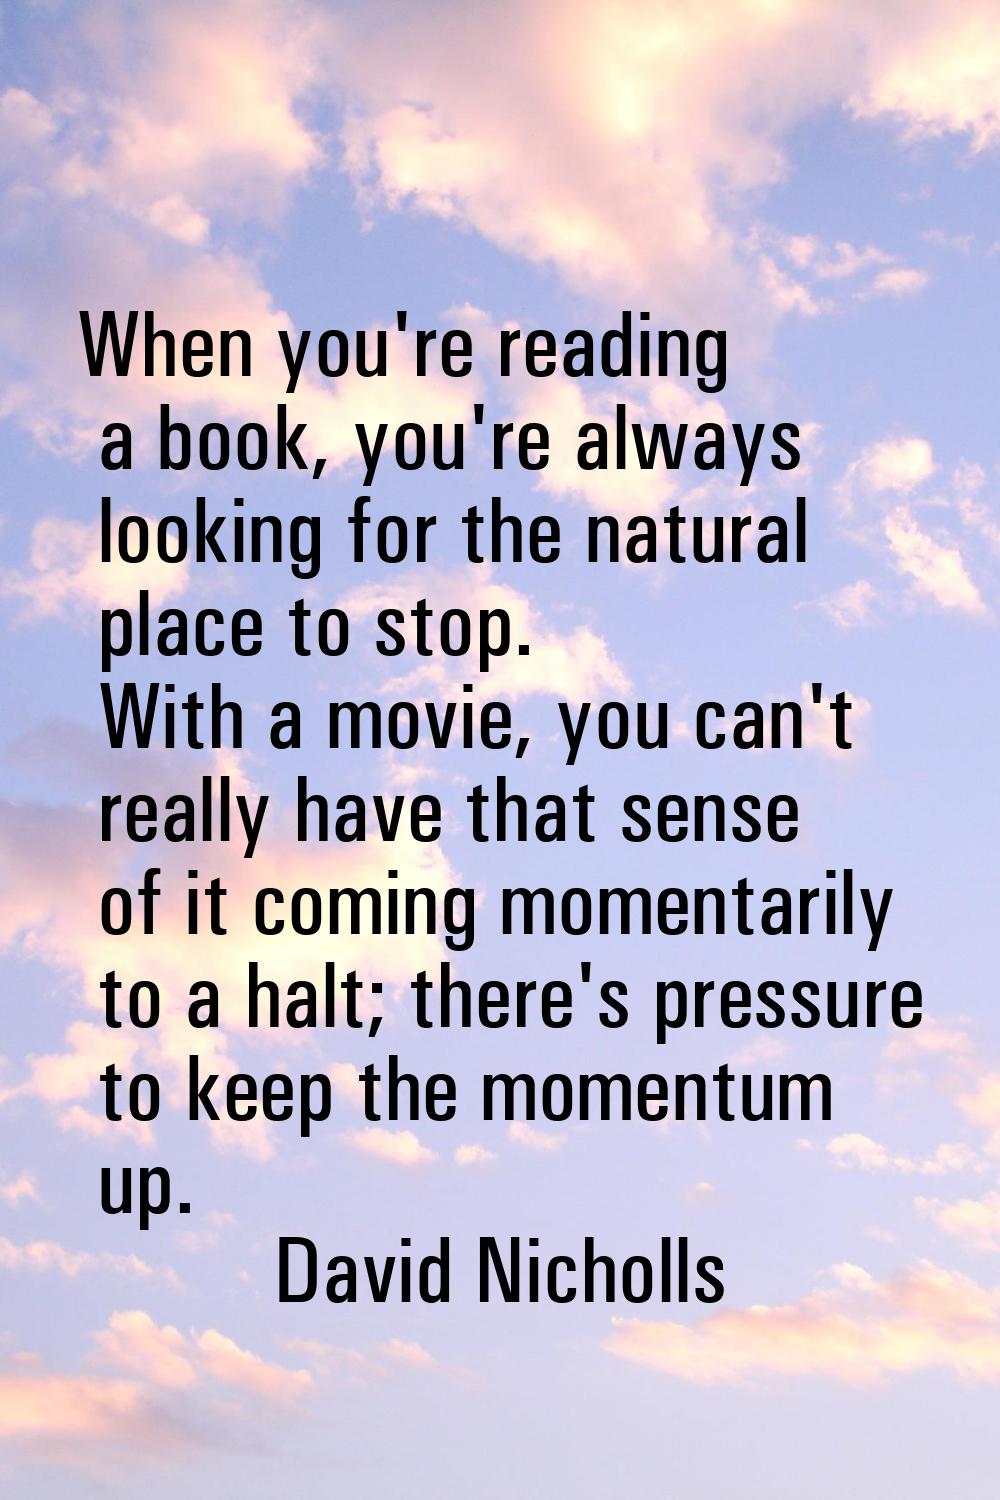 When you're reading a book, you're always looking for the natural place to stop. With a movie, you 